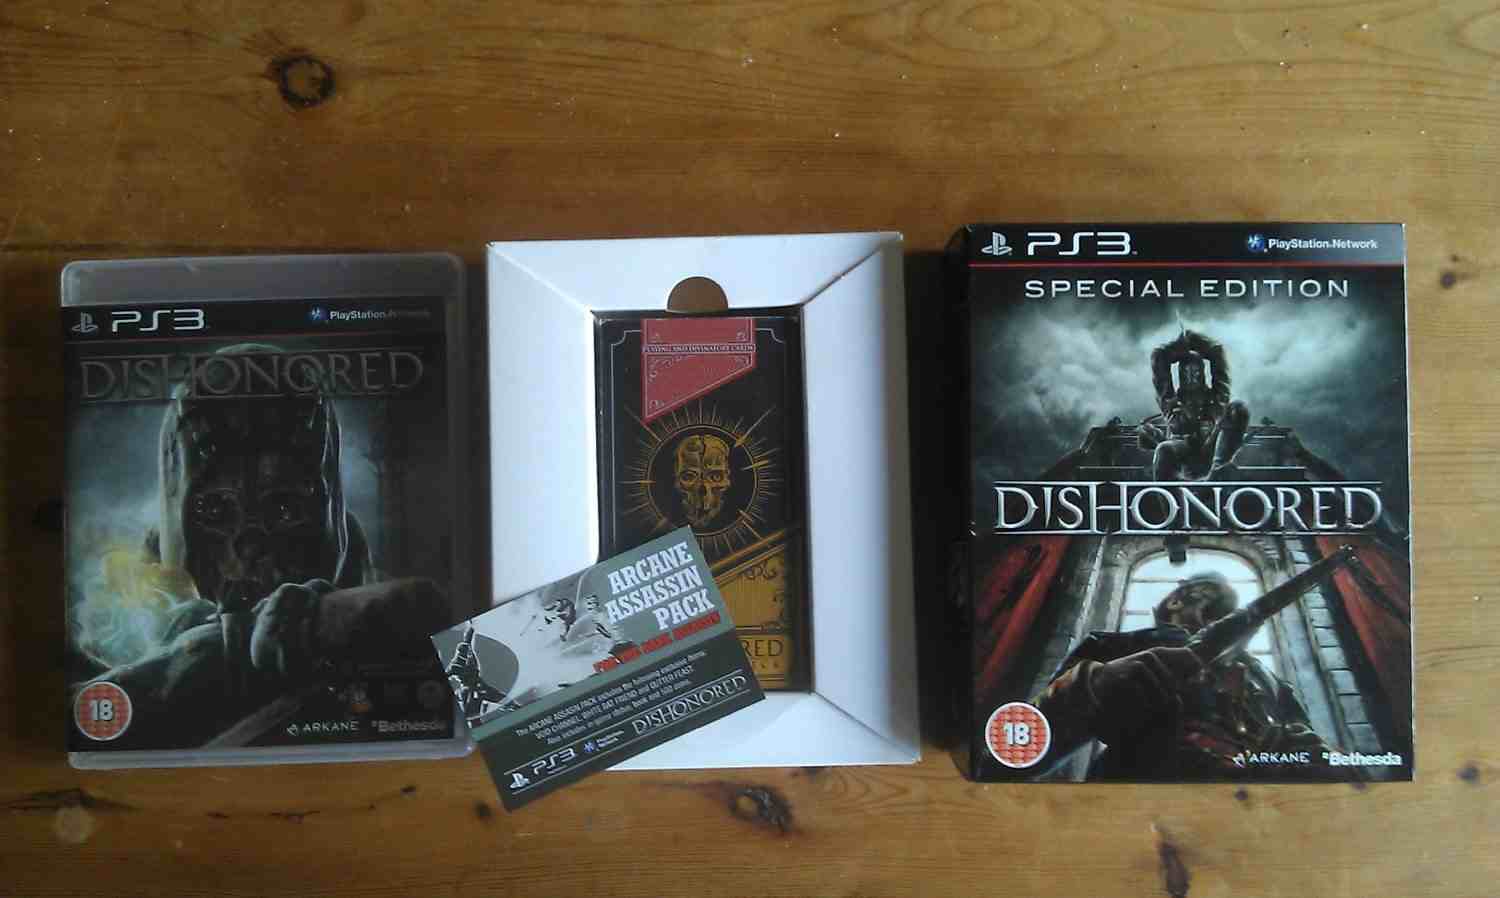 Dishonored Special Edition PS3